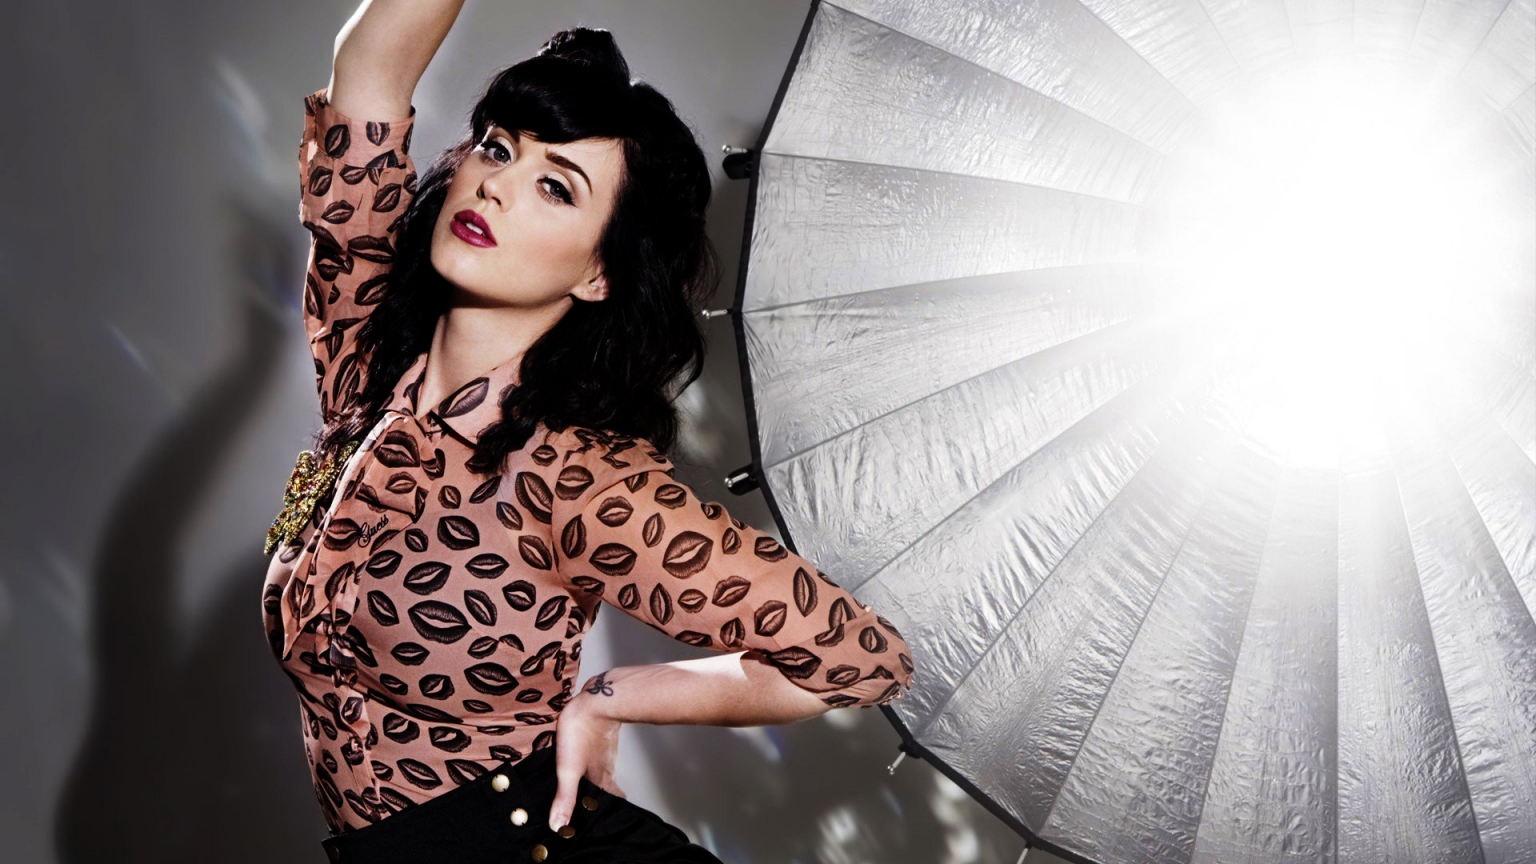 Katy Perry Photo Session for 1536 x 864 HDTV resolution